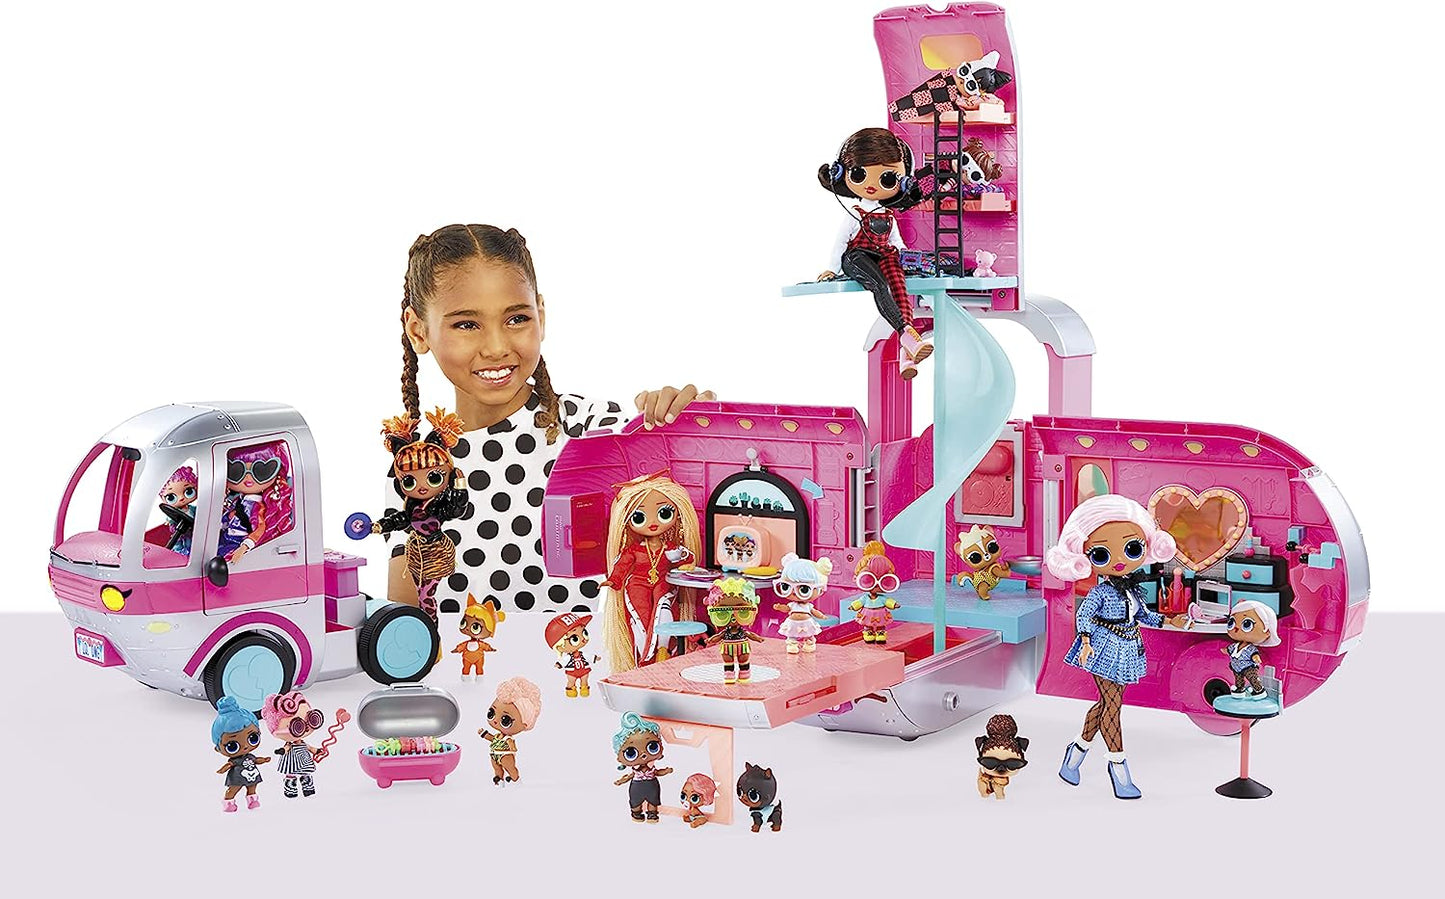 New LOL Surprise OMG 4-in-1 Glamper Fashion Camper Deluxe Doll Playset 55+ Surprises